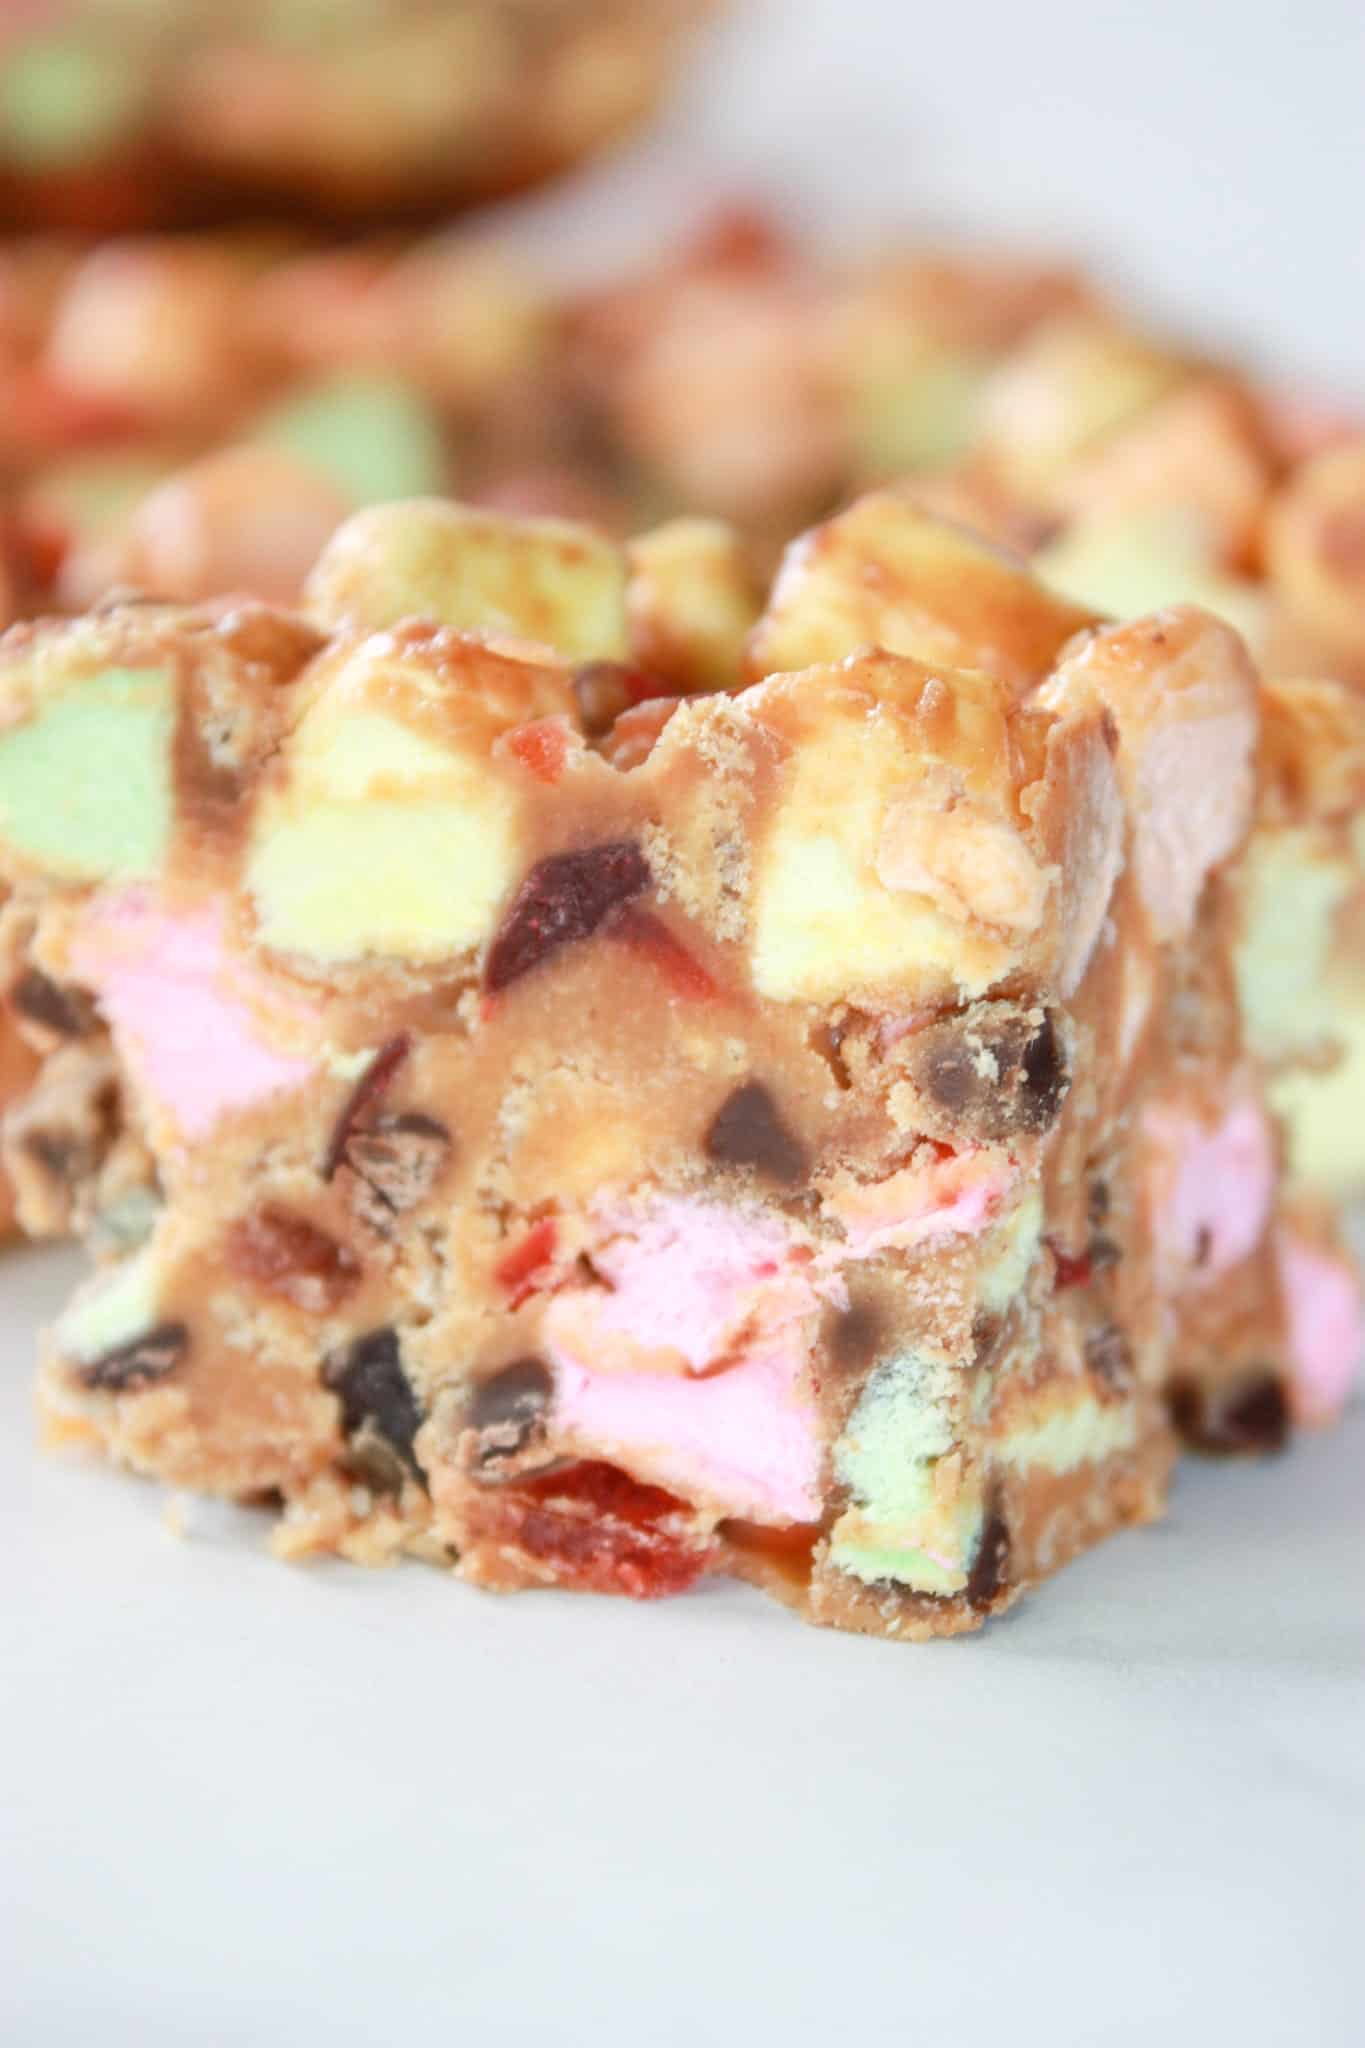 Loaded Peanut Butter Marshmallow Squares are a delicious variation of the Butterscotch Confetti that I grew up with.